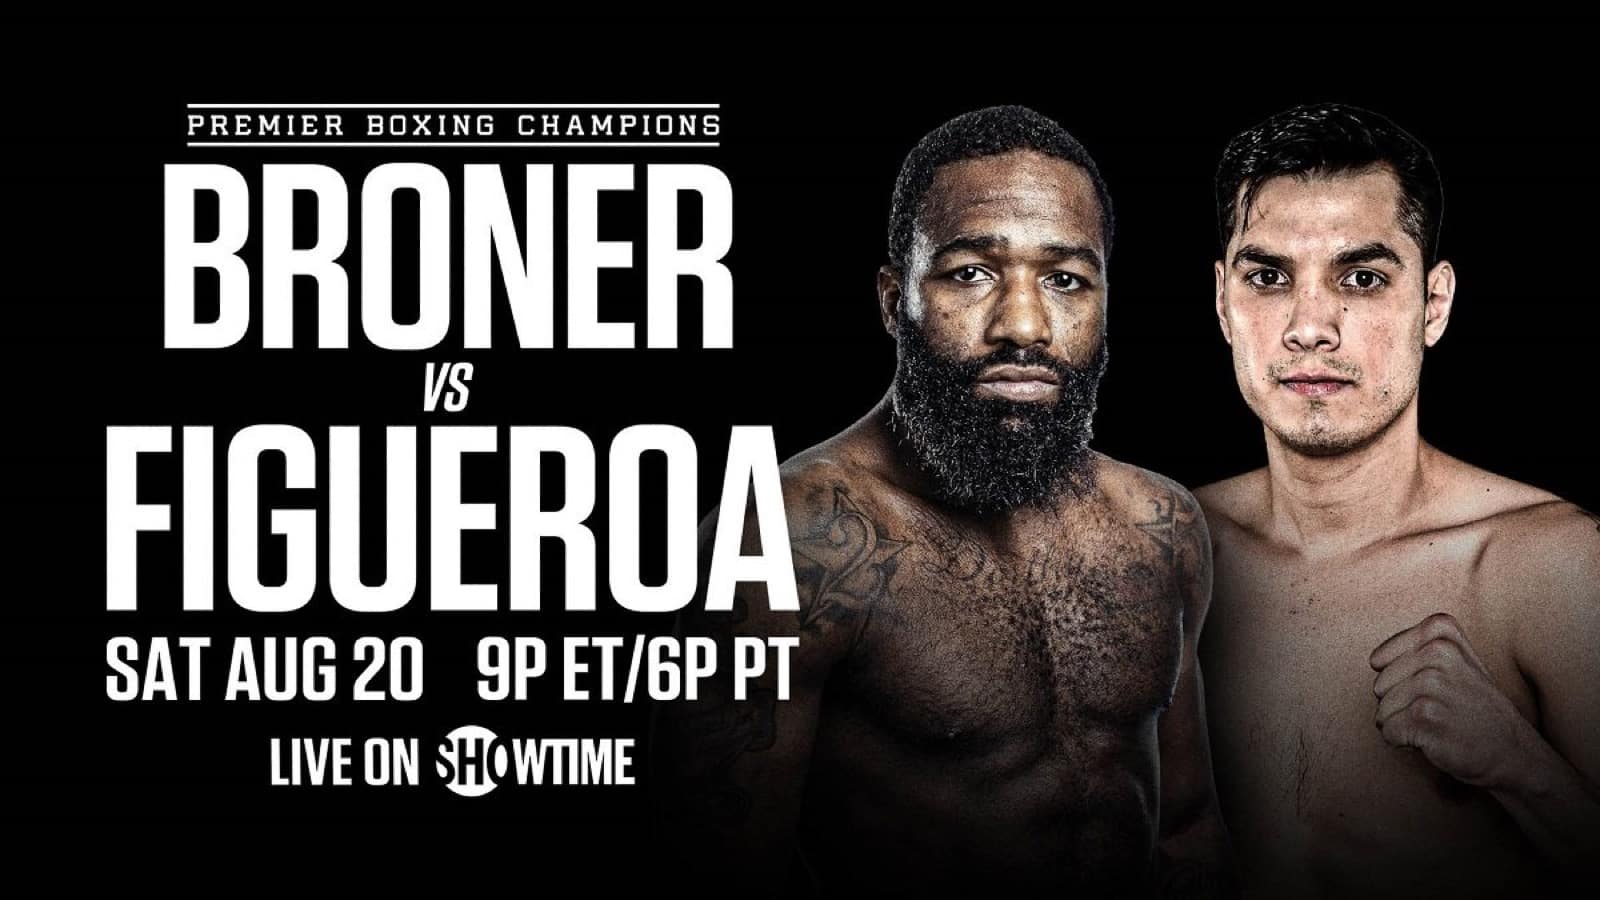 Image: Adrien Broner: "I know I'm going to be champion again"